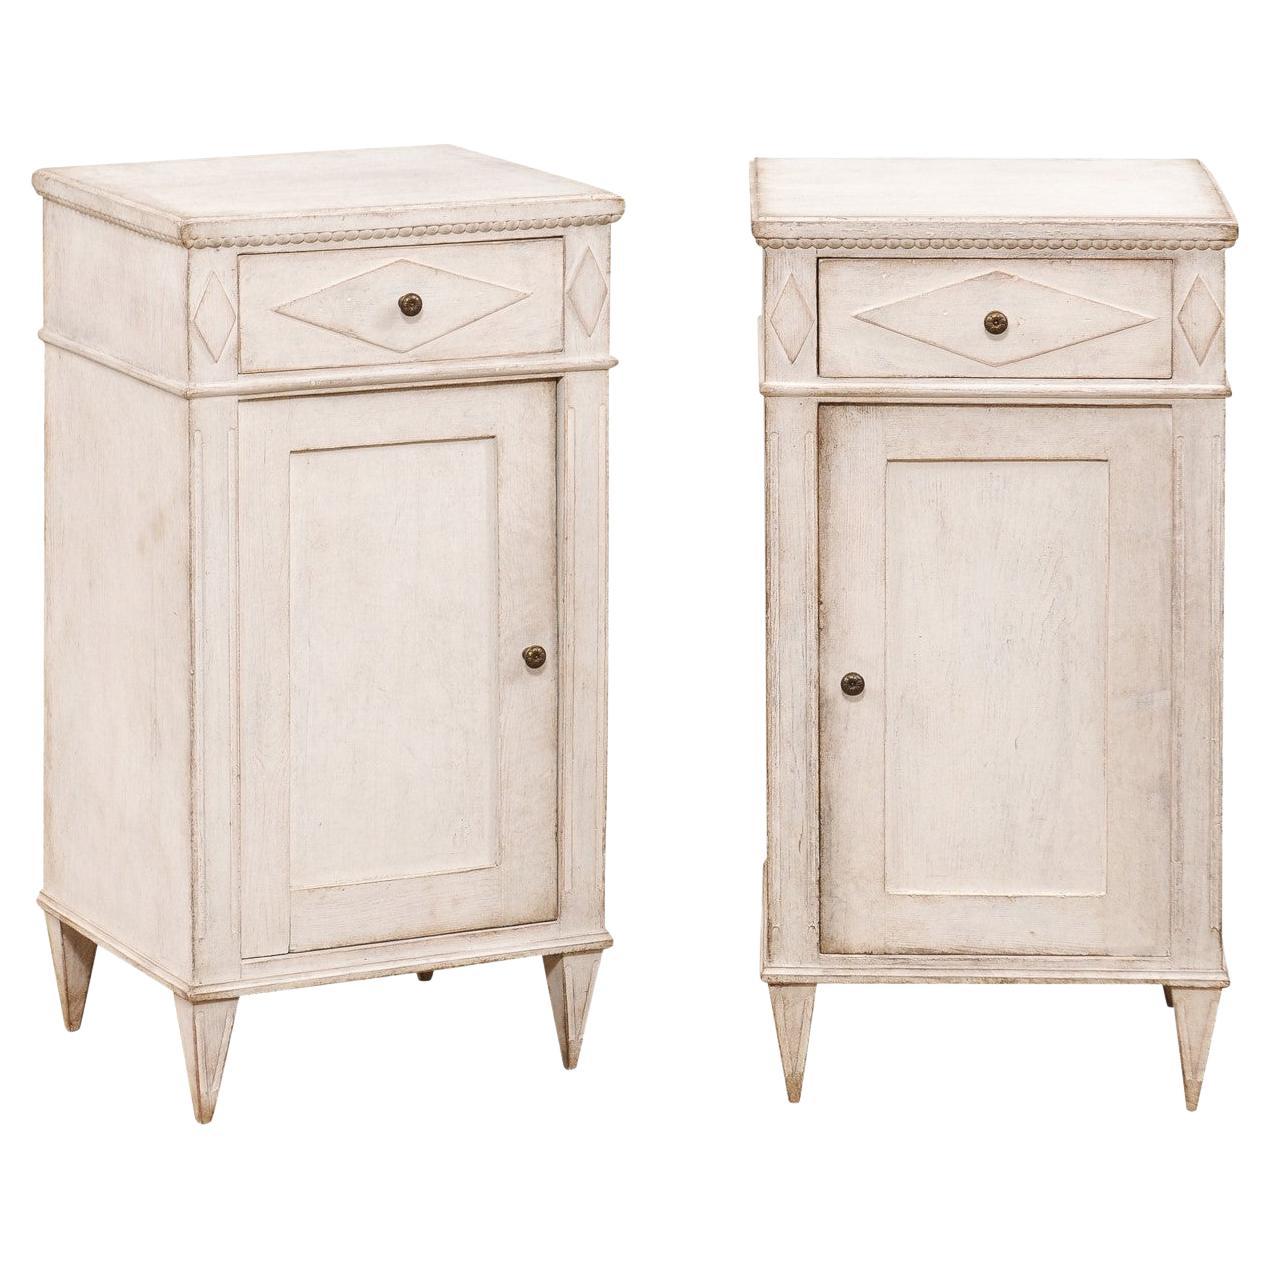 Pair of Swedish Gustavian Style 19th Century Painted Wood Bedside Cabinets